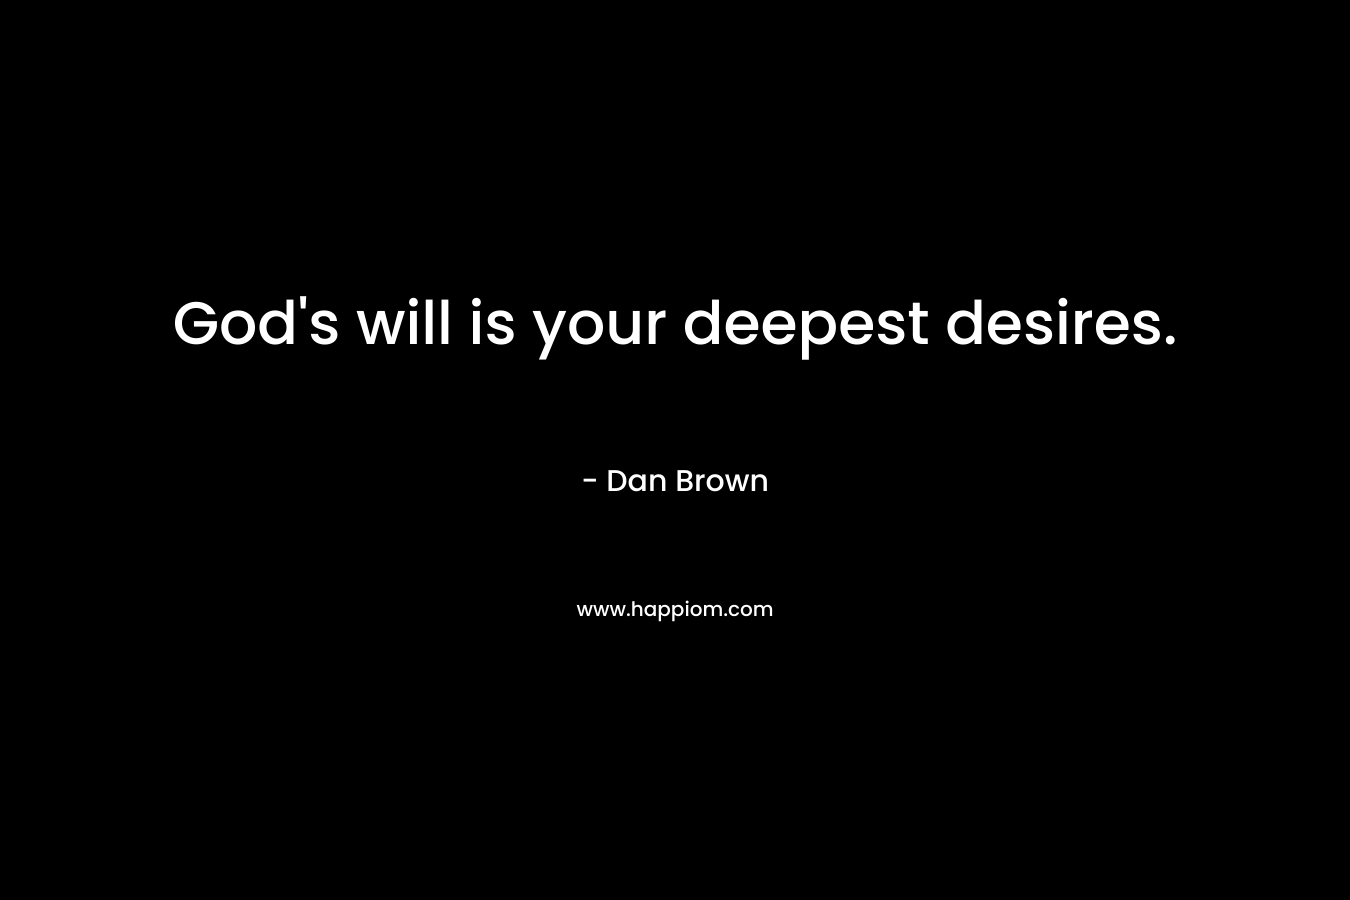 God's will is your deepest desires.